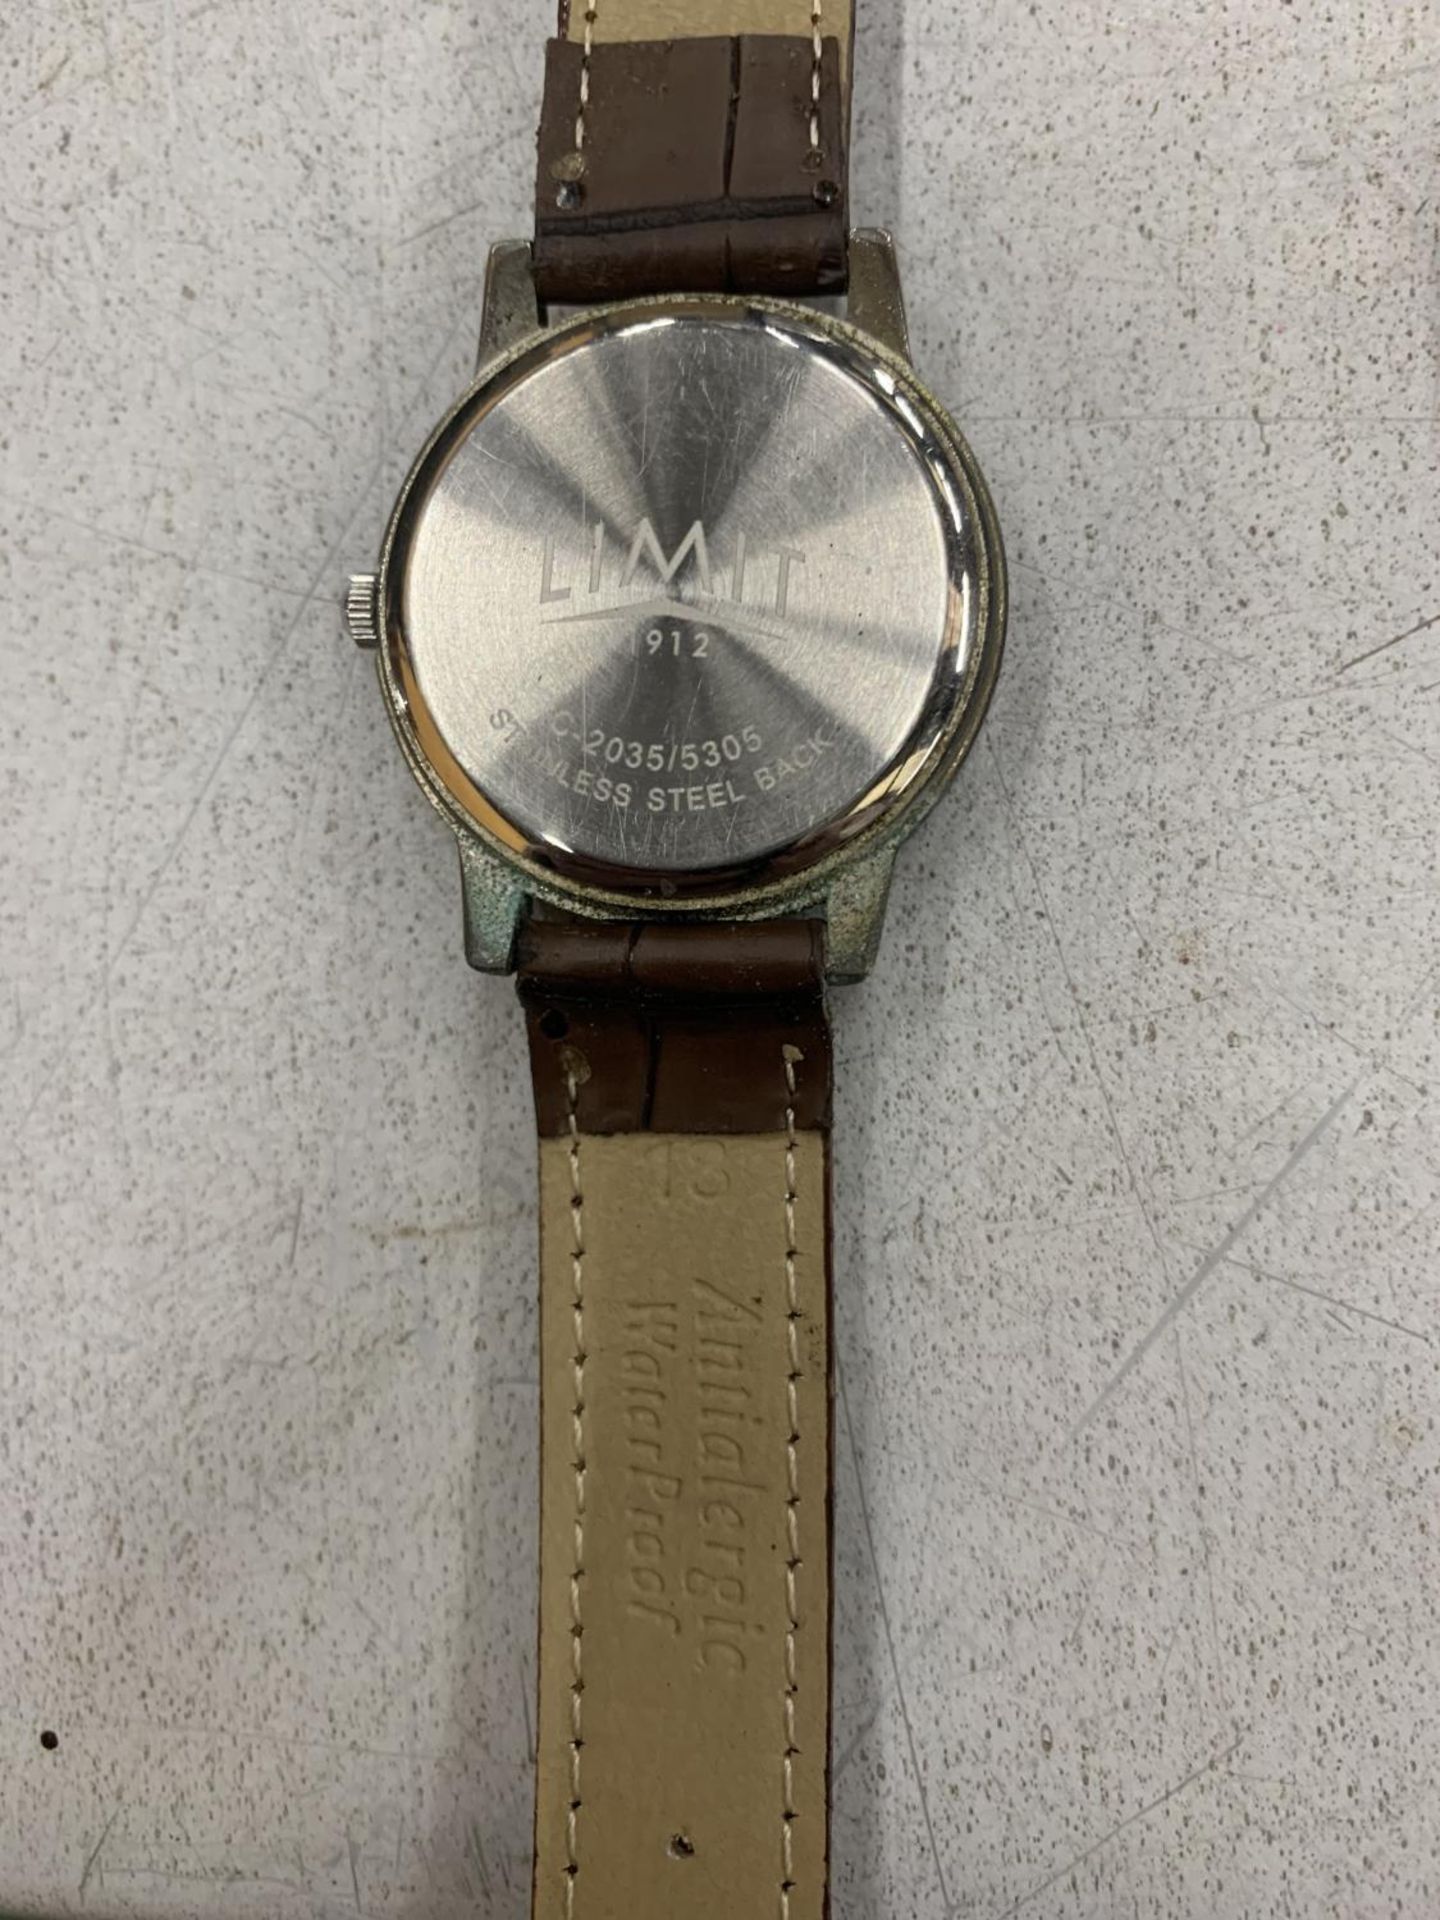 A LIMIT WRISTWATCH, WORKING AT TIME OF CATALOGUING - Image 2 of 2